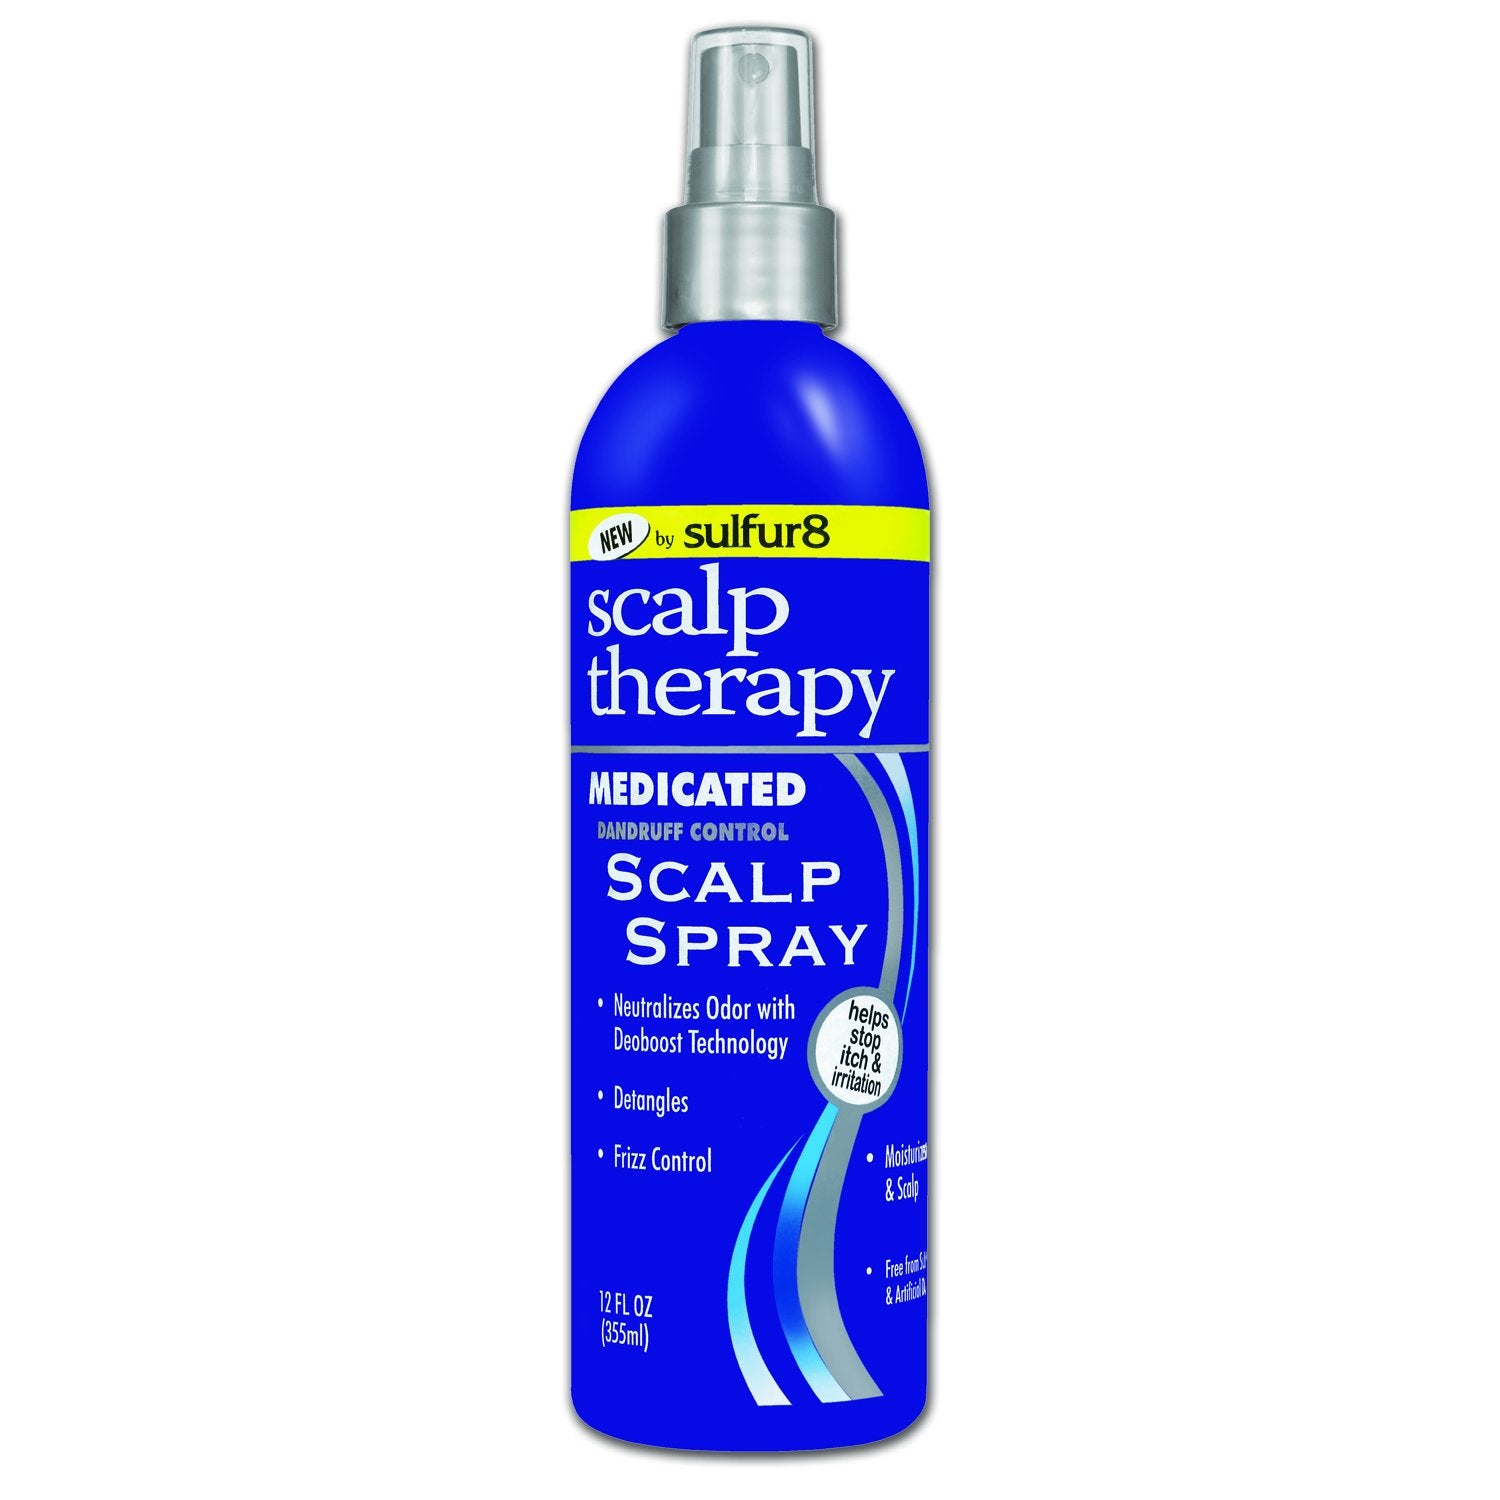 Sulfur 8 Scalp Therapy Medicated Spray 12Oz